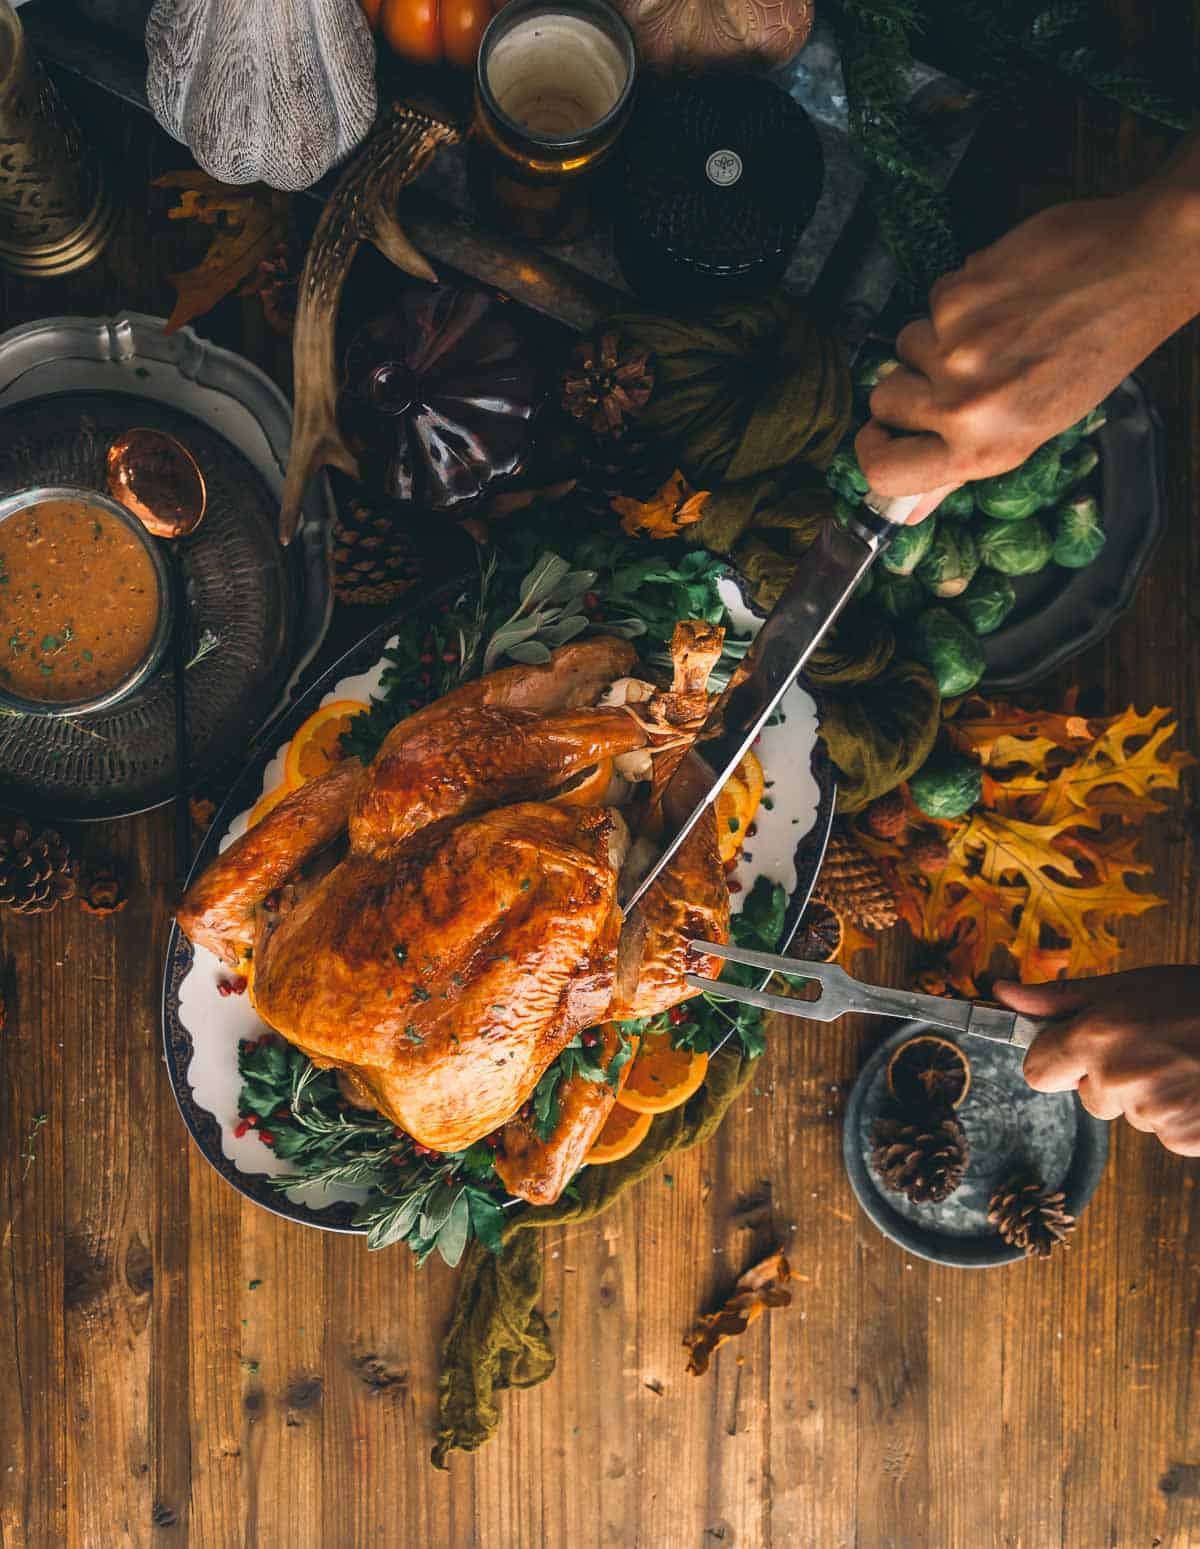 Roasting a turkey this Thanksgiving? Gobble up this $11 cult-fave